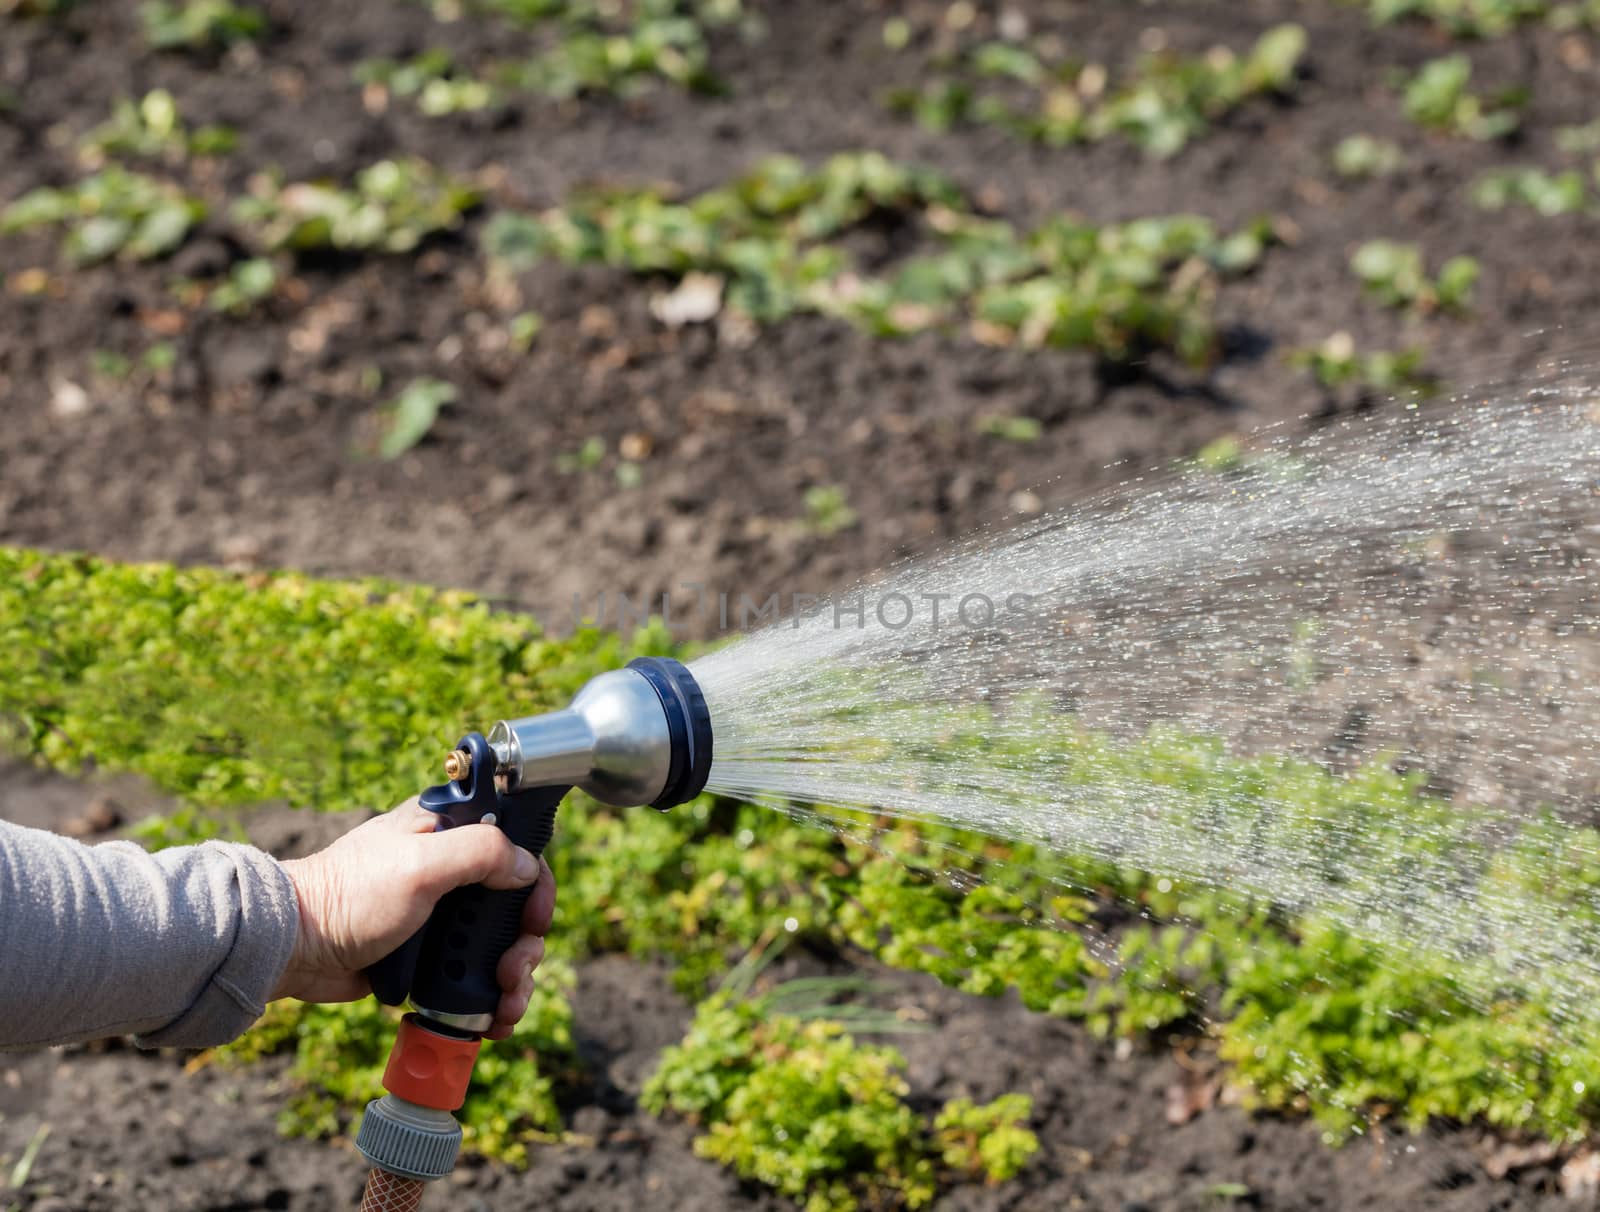 The gardener holds an irrigation hose and spray water in the garden. by Sergii